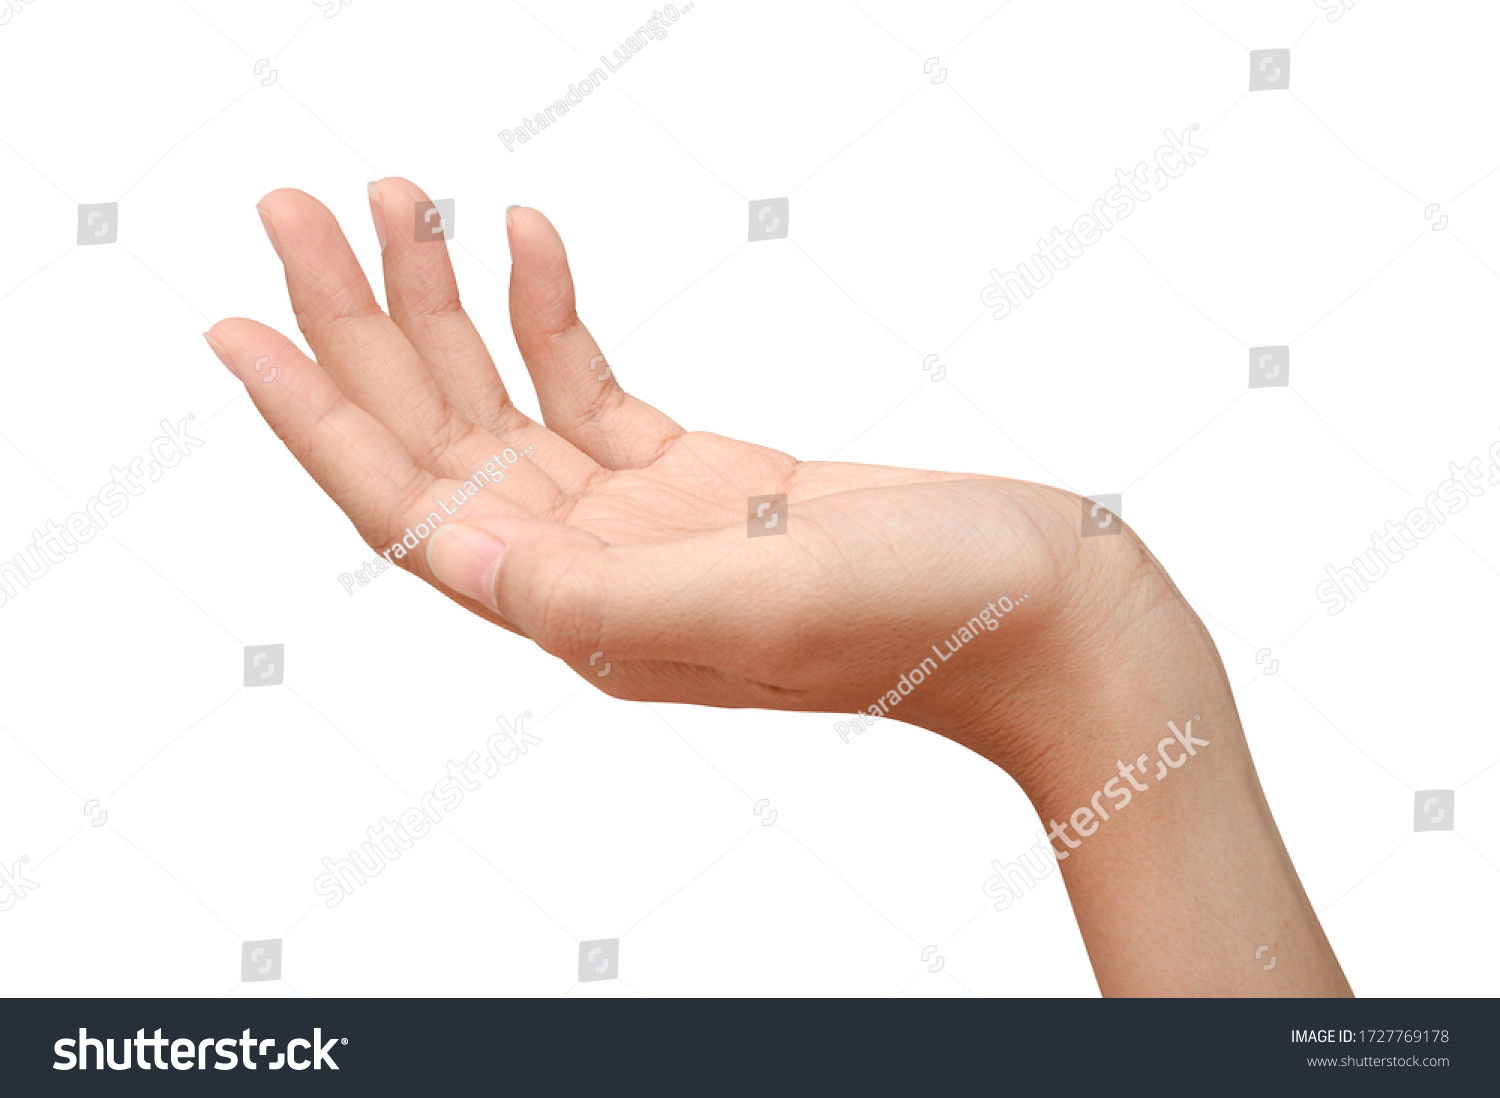 Hand open and ready to help or receive. Gesture isolated on white background with clipping path. Helping hand outstretched for salvation. #1727769178